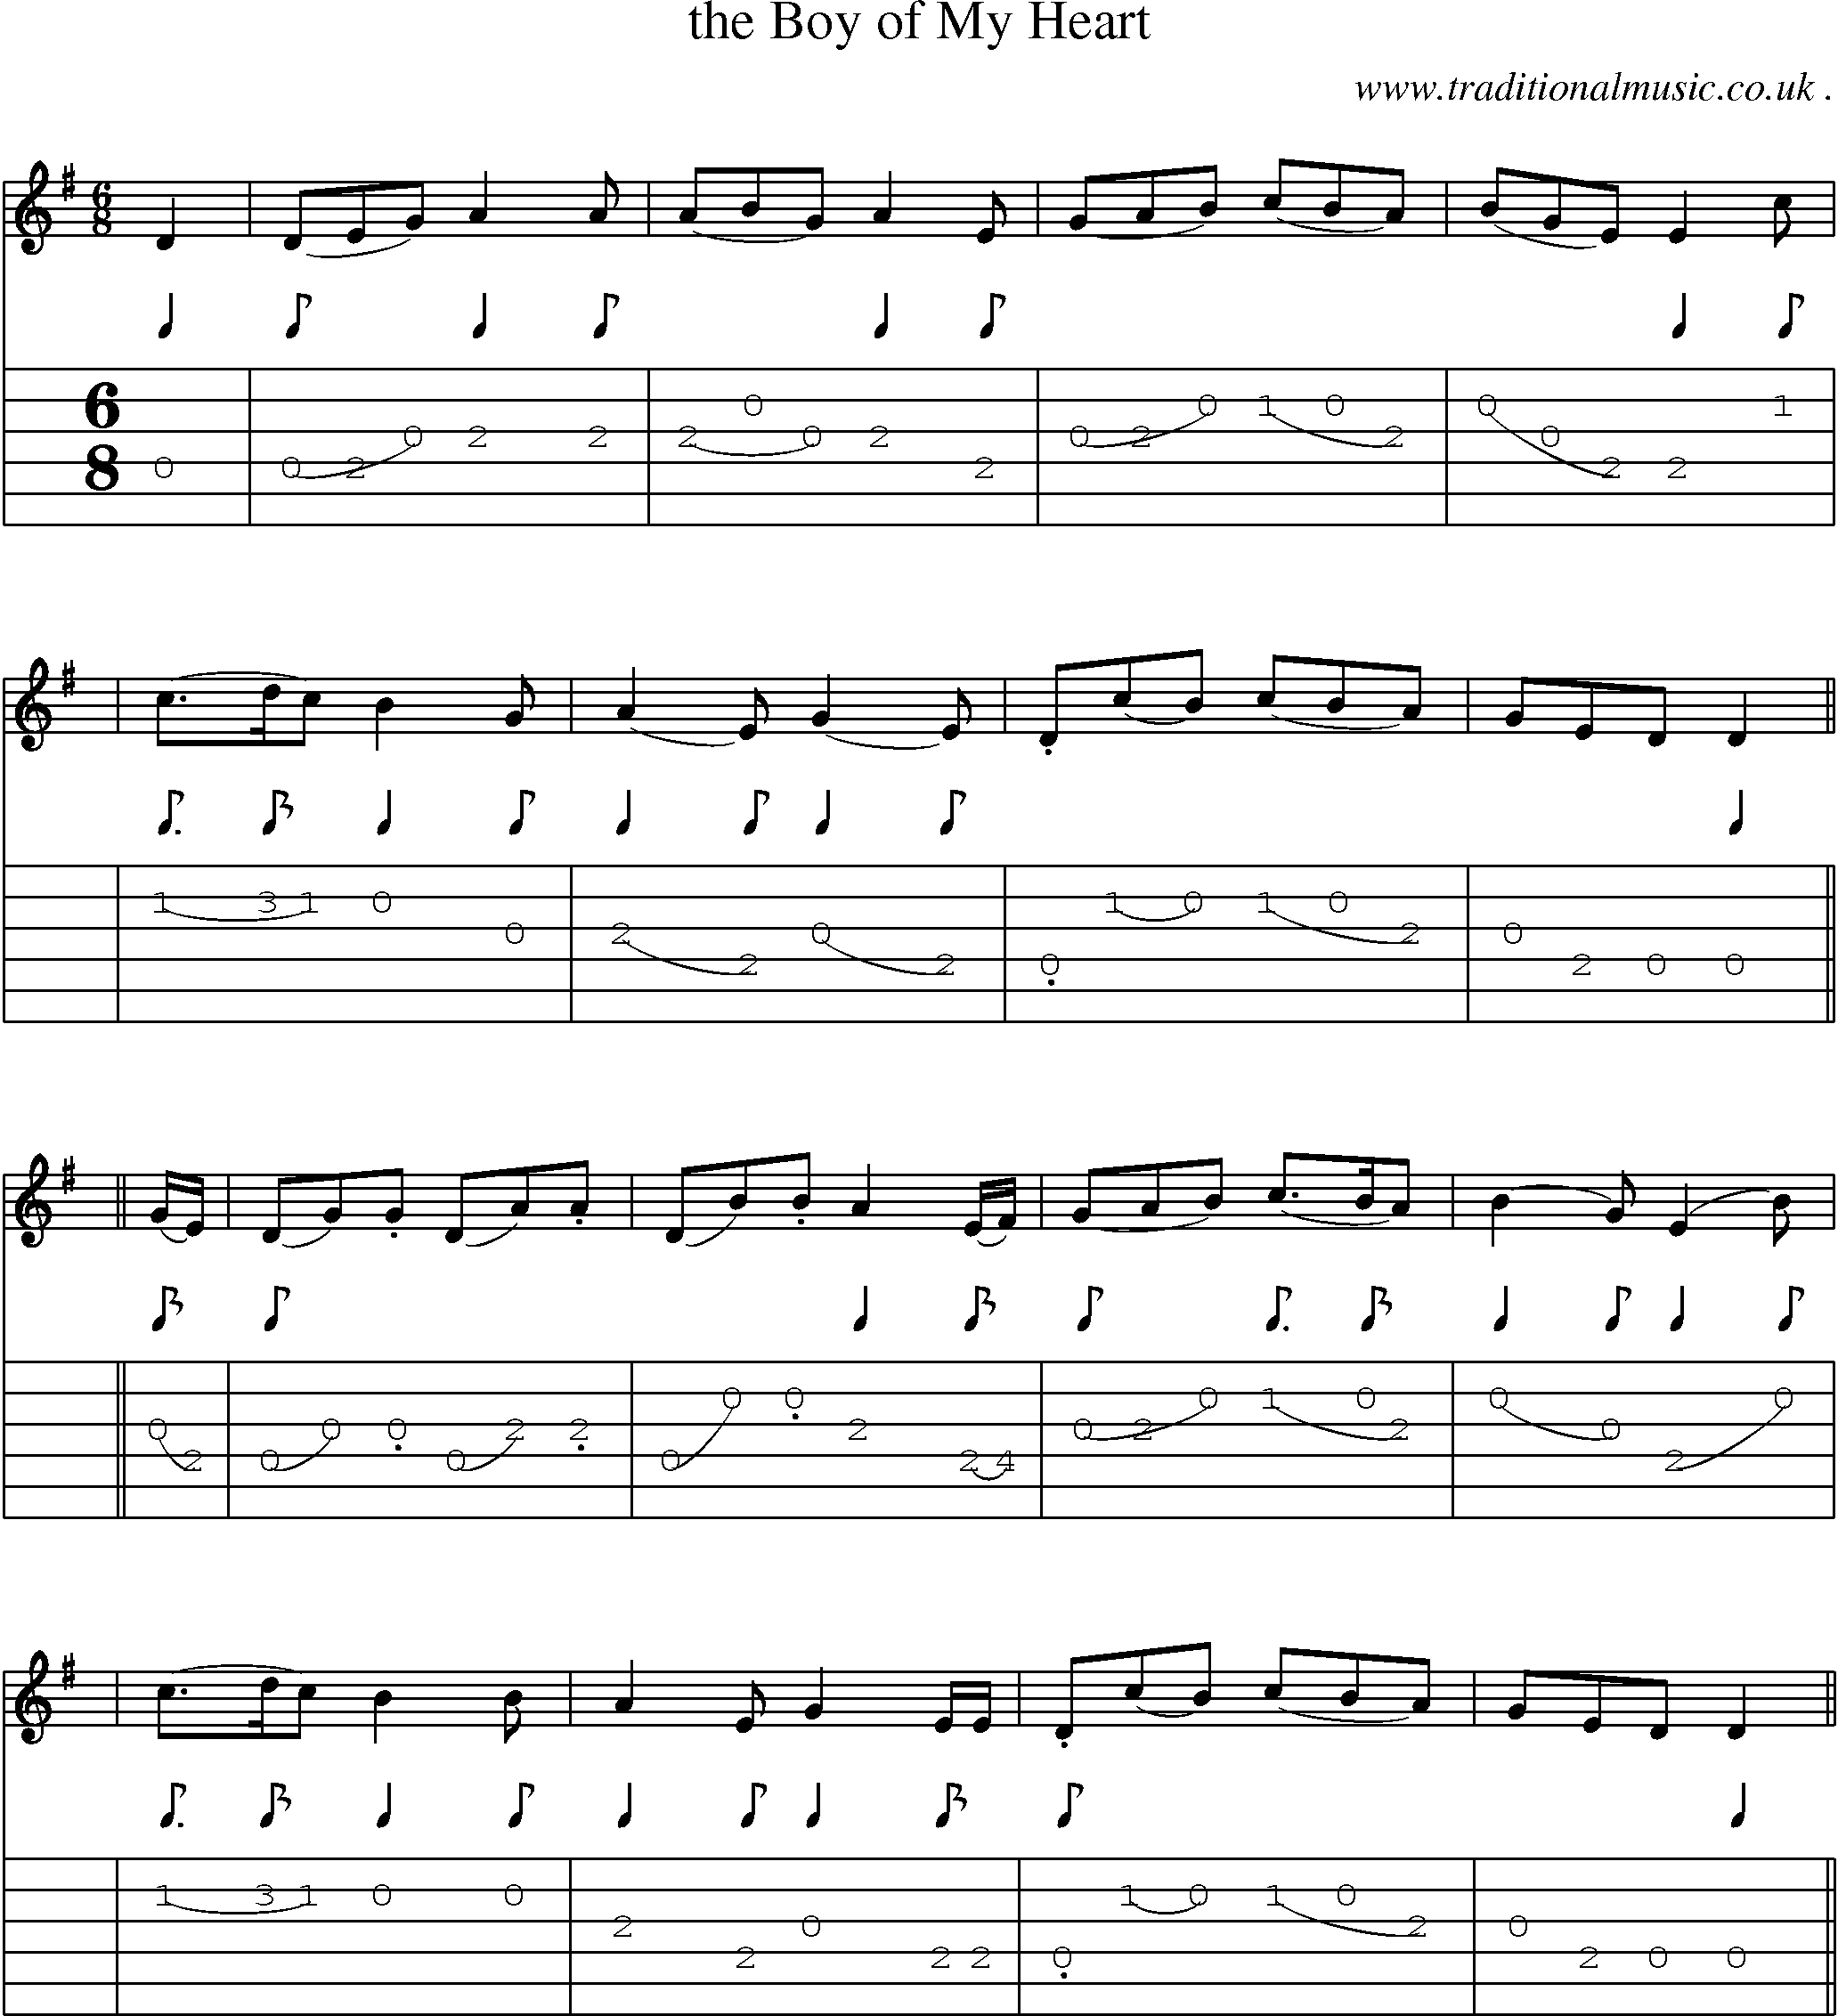 Sheet-music  score, Chords and Guitar Tabs for The Boy Of My Heart